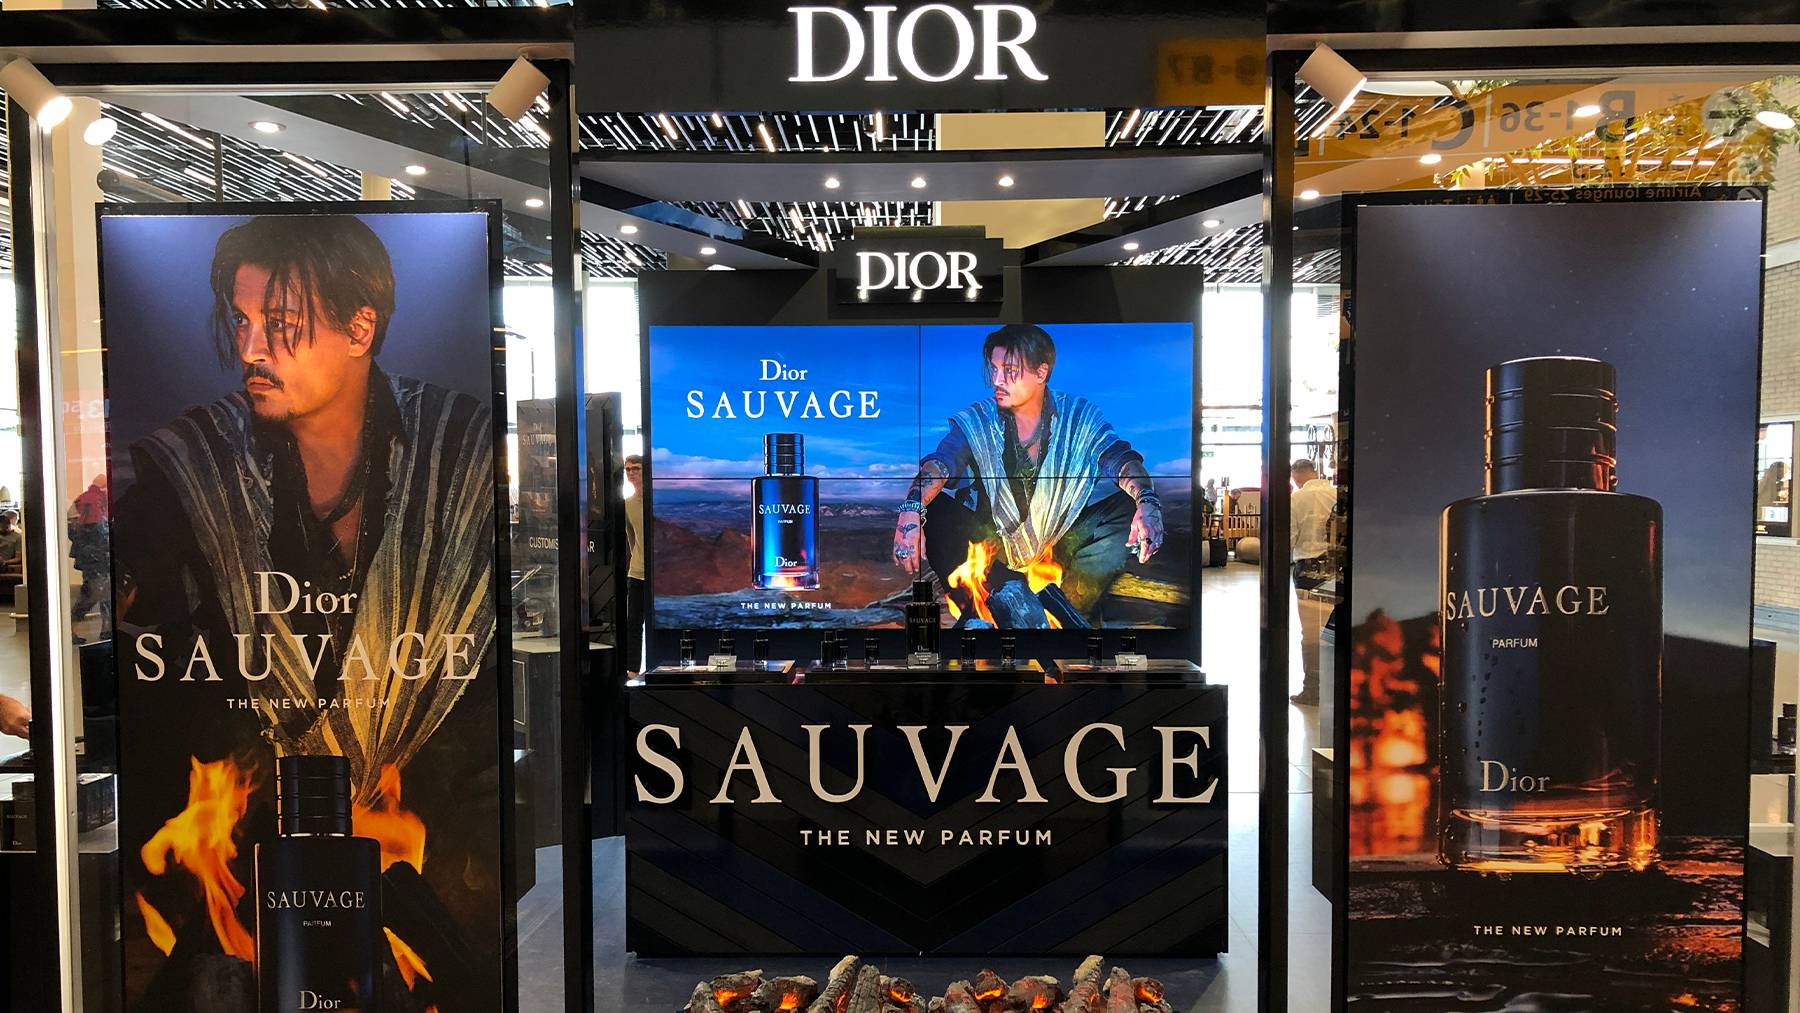 Dior has built out dedicated displays to support sales of its best-selling Sauvage range.